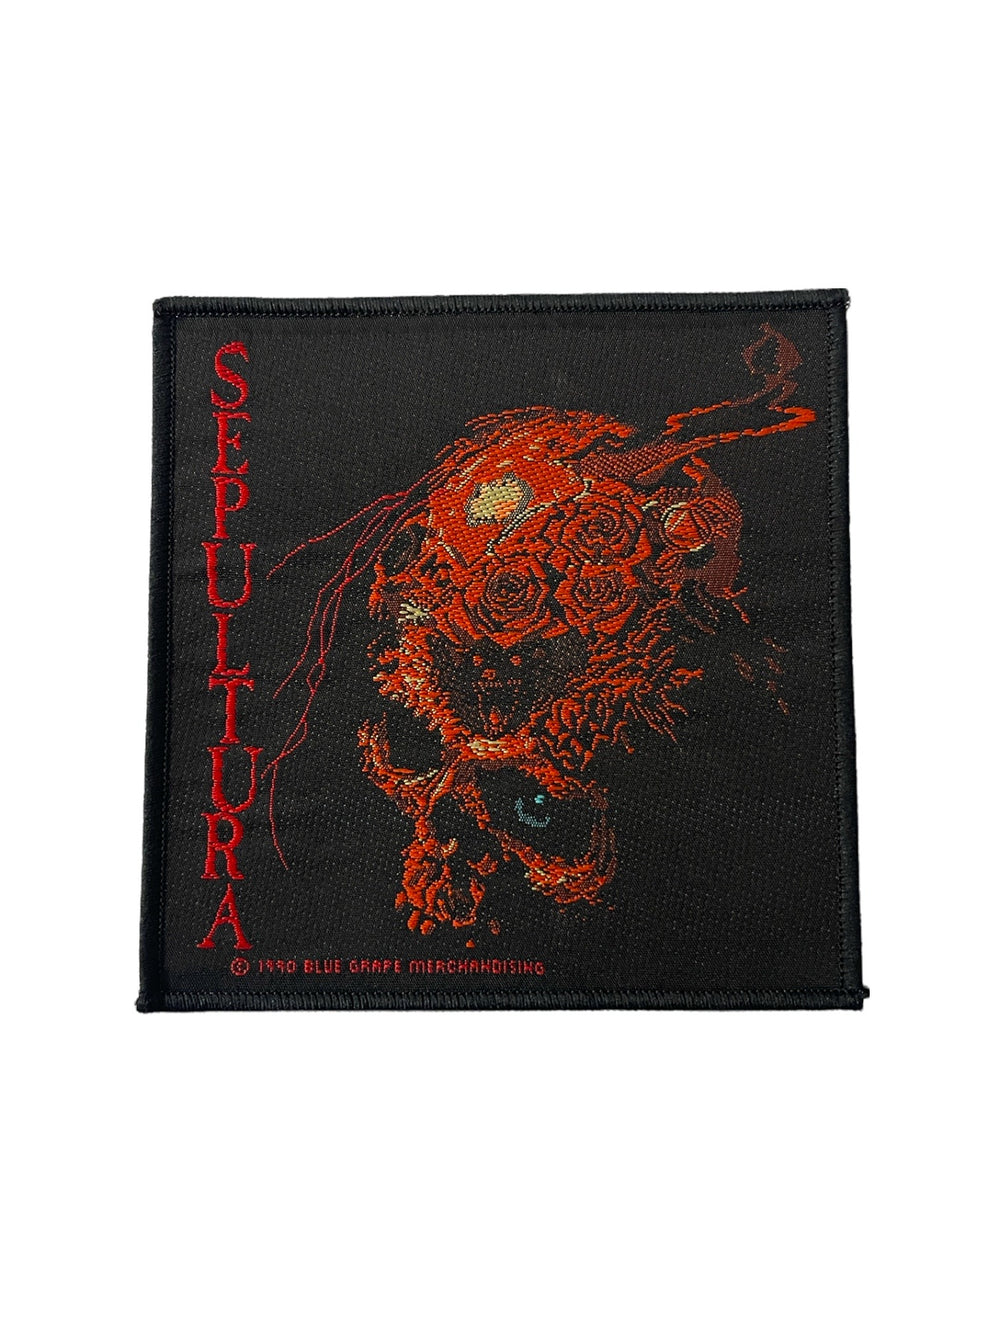 Sepultura Skull Official Woven Patch Brand New